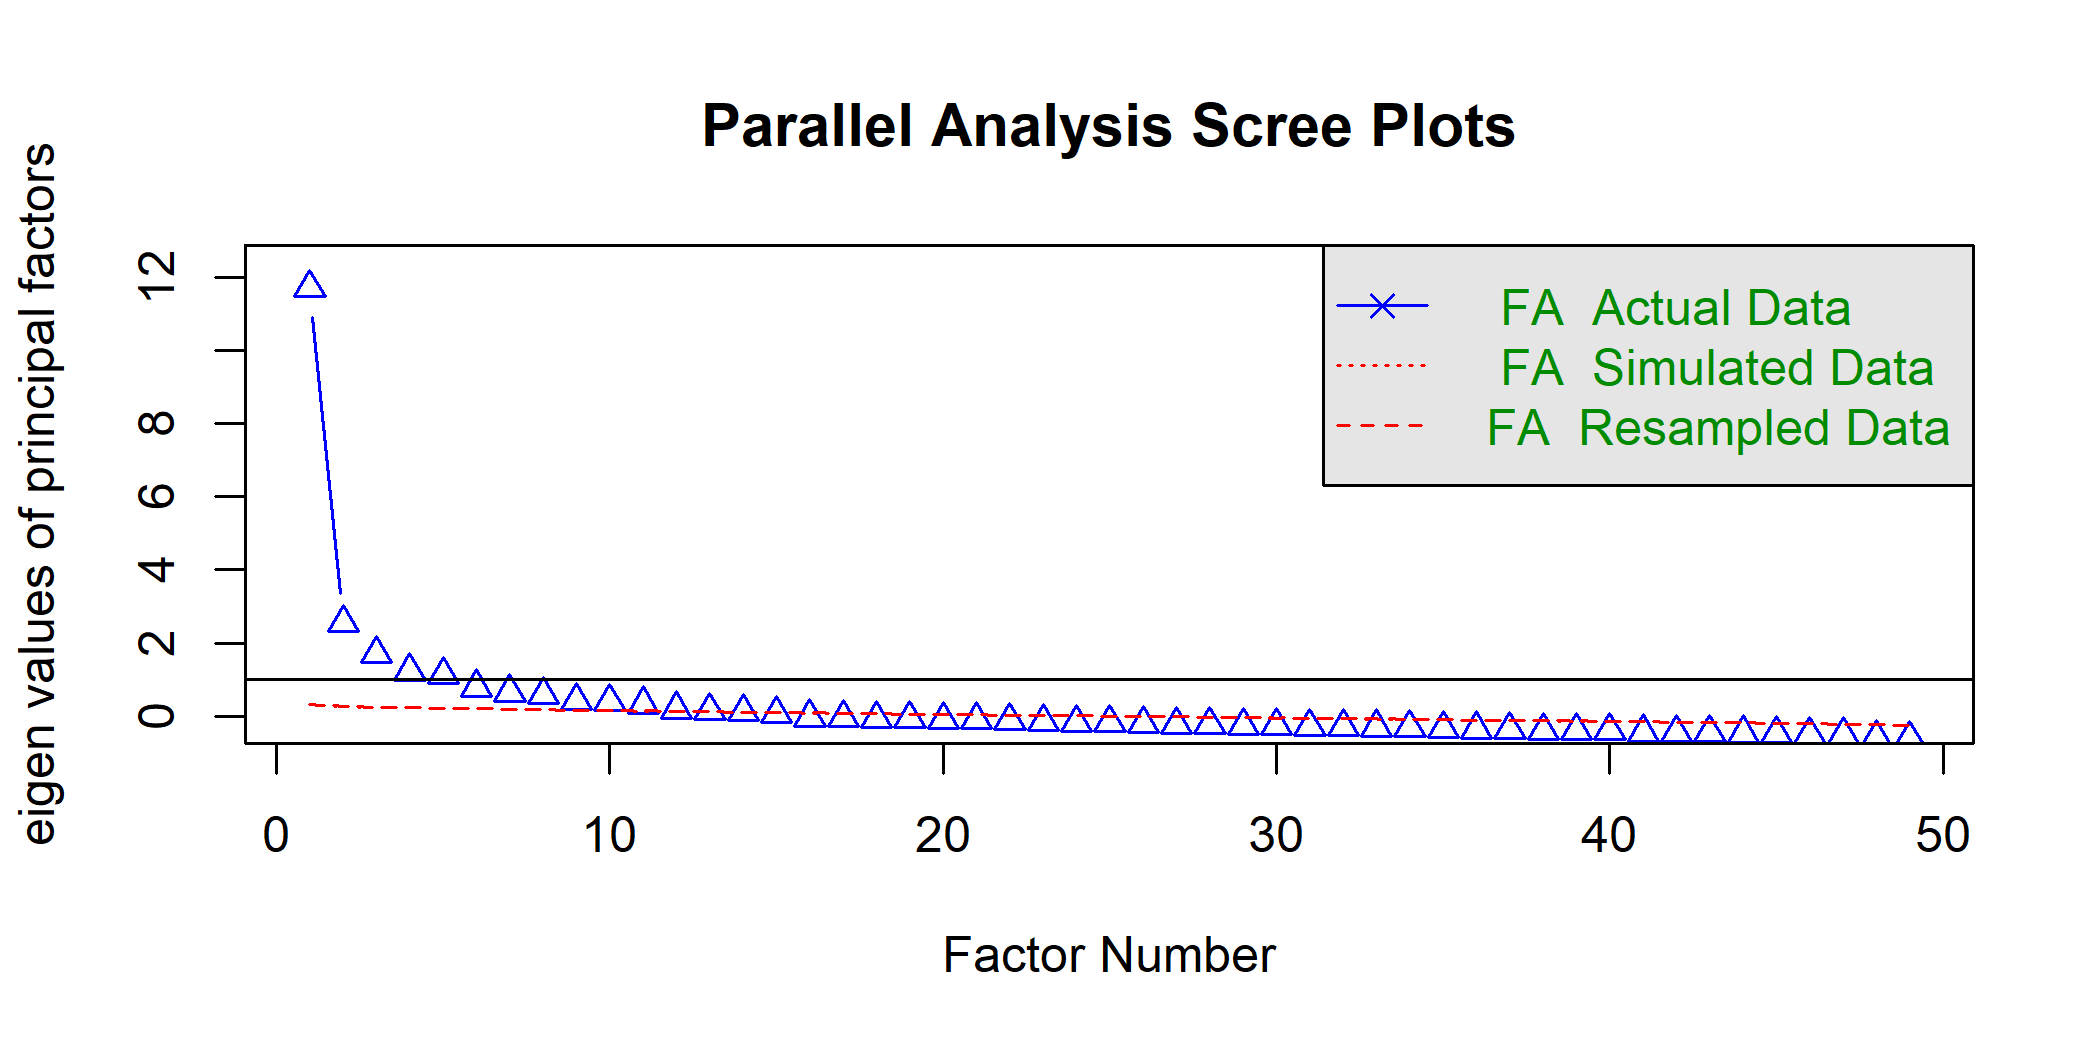 Fig 4: Parallel analysis is an approach used to inform dimension reduction in questionaires  This plot depicts the results of parallel analysis applied to a suvery of suicide ideation for n=2213 students from 3 Cincinnati-area schools.  The results indicate that 13 principal factors can sufficiently represent the 50+ item questionaire.